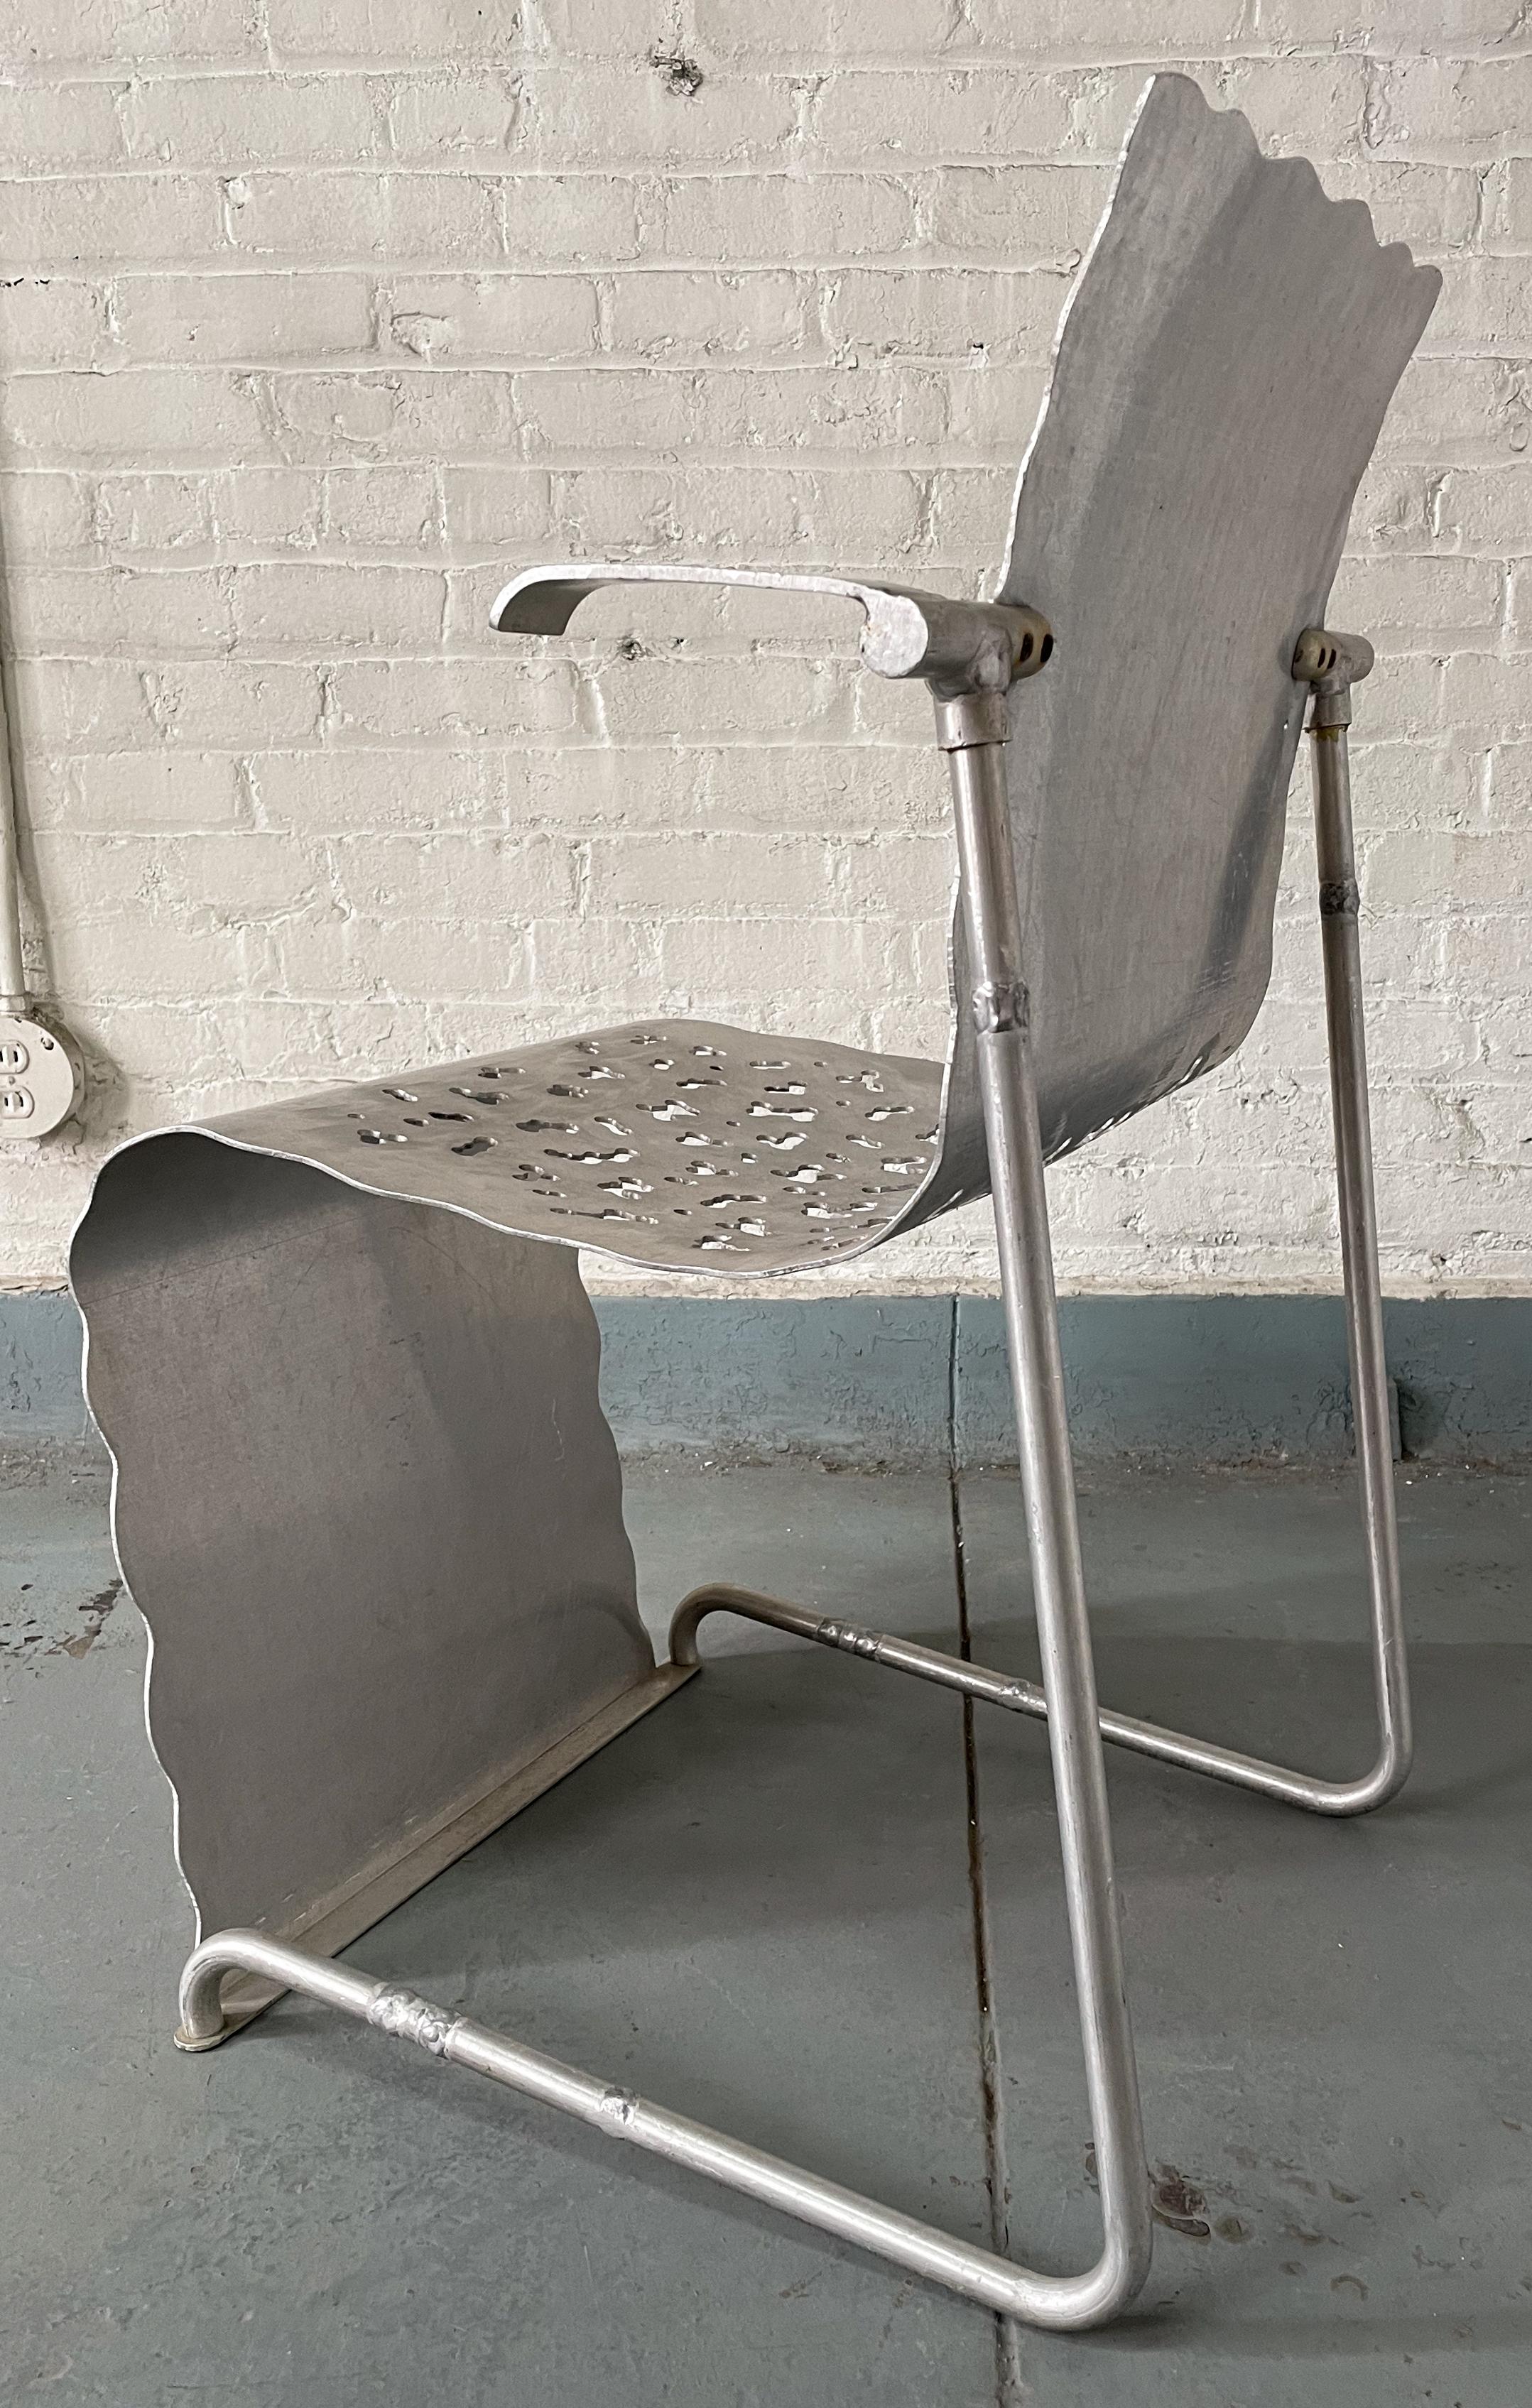 American Richard Schultz Prototype Aluminum Stacking Chair #1 For Sale